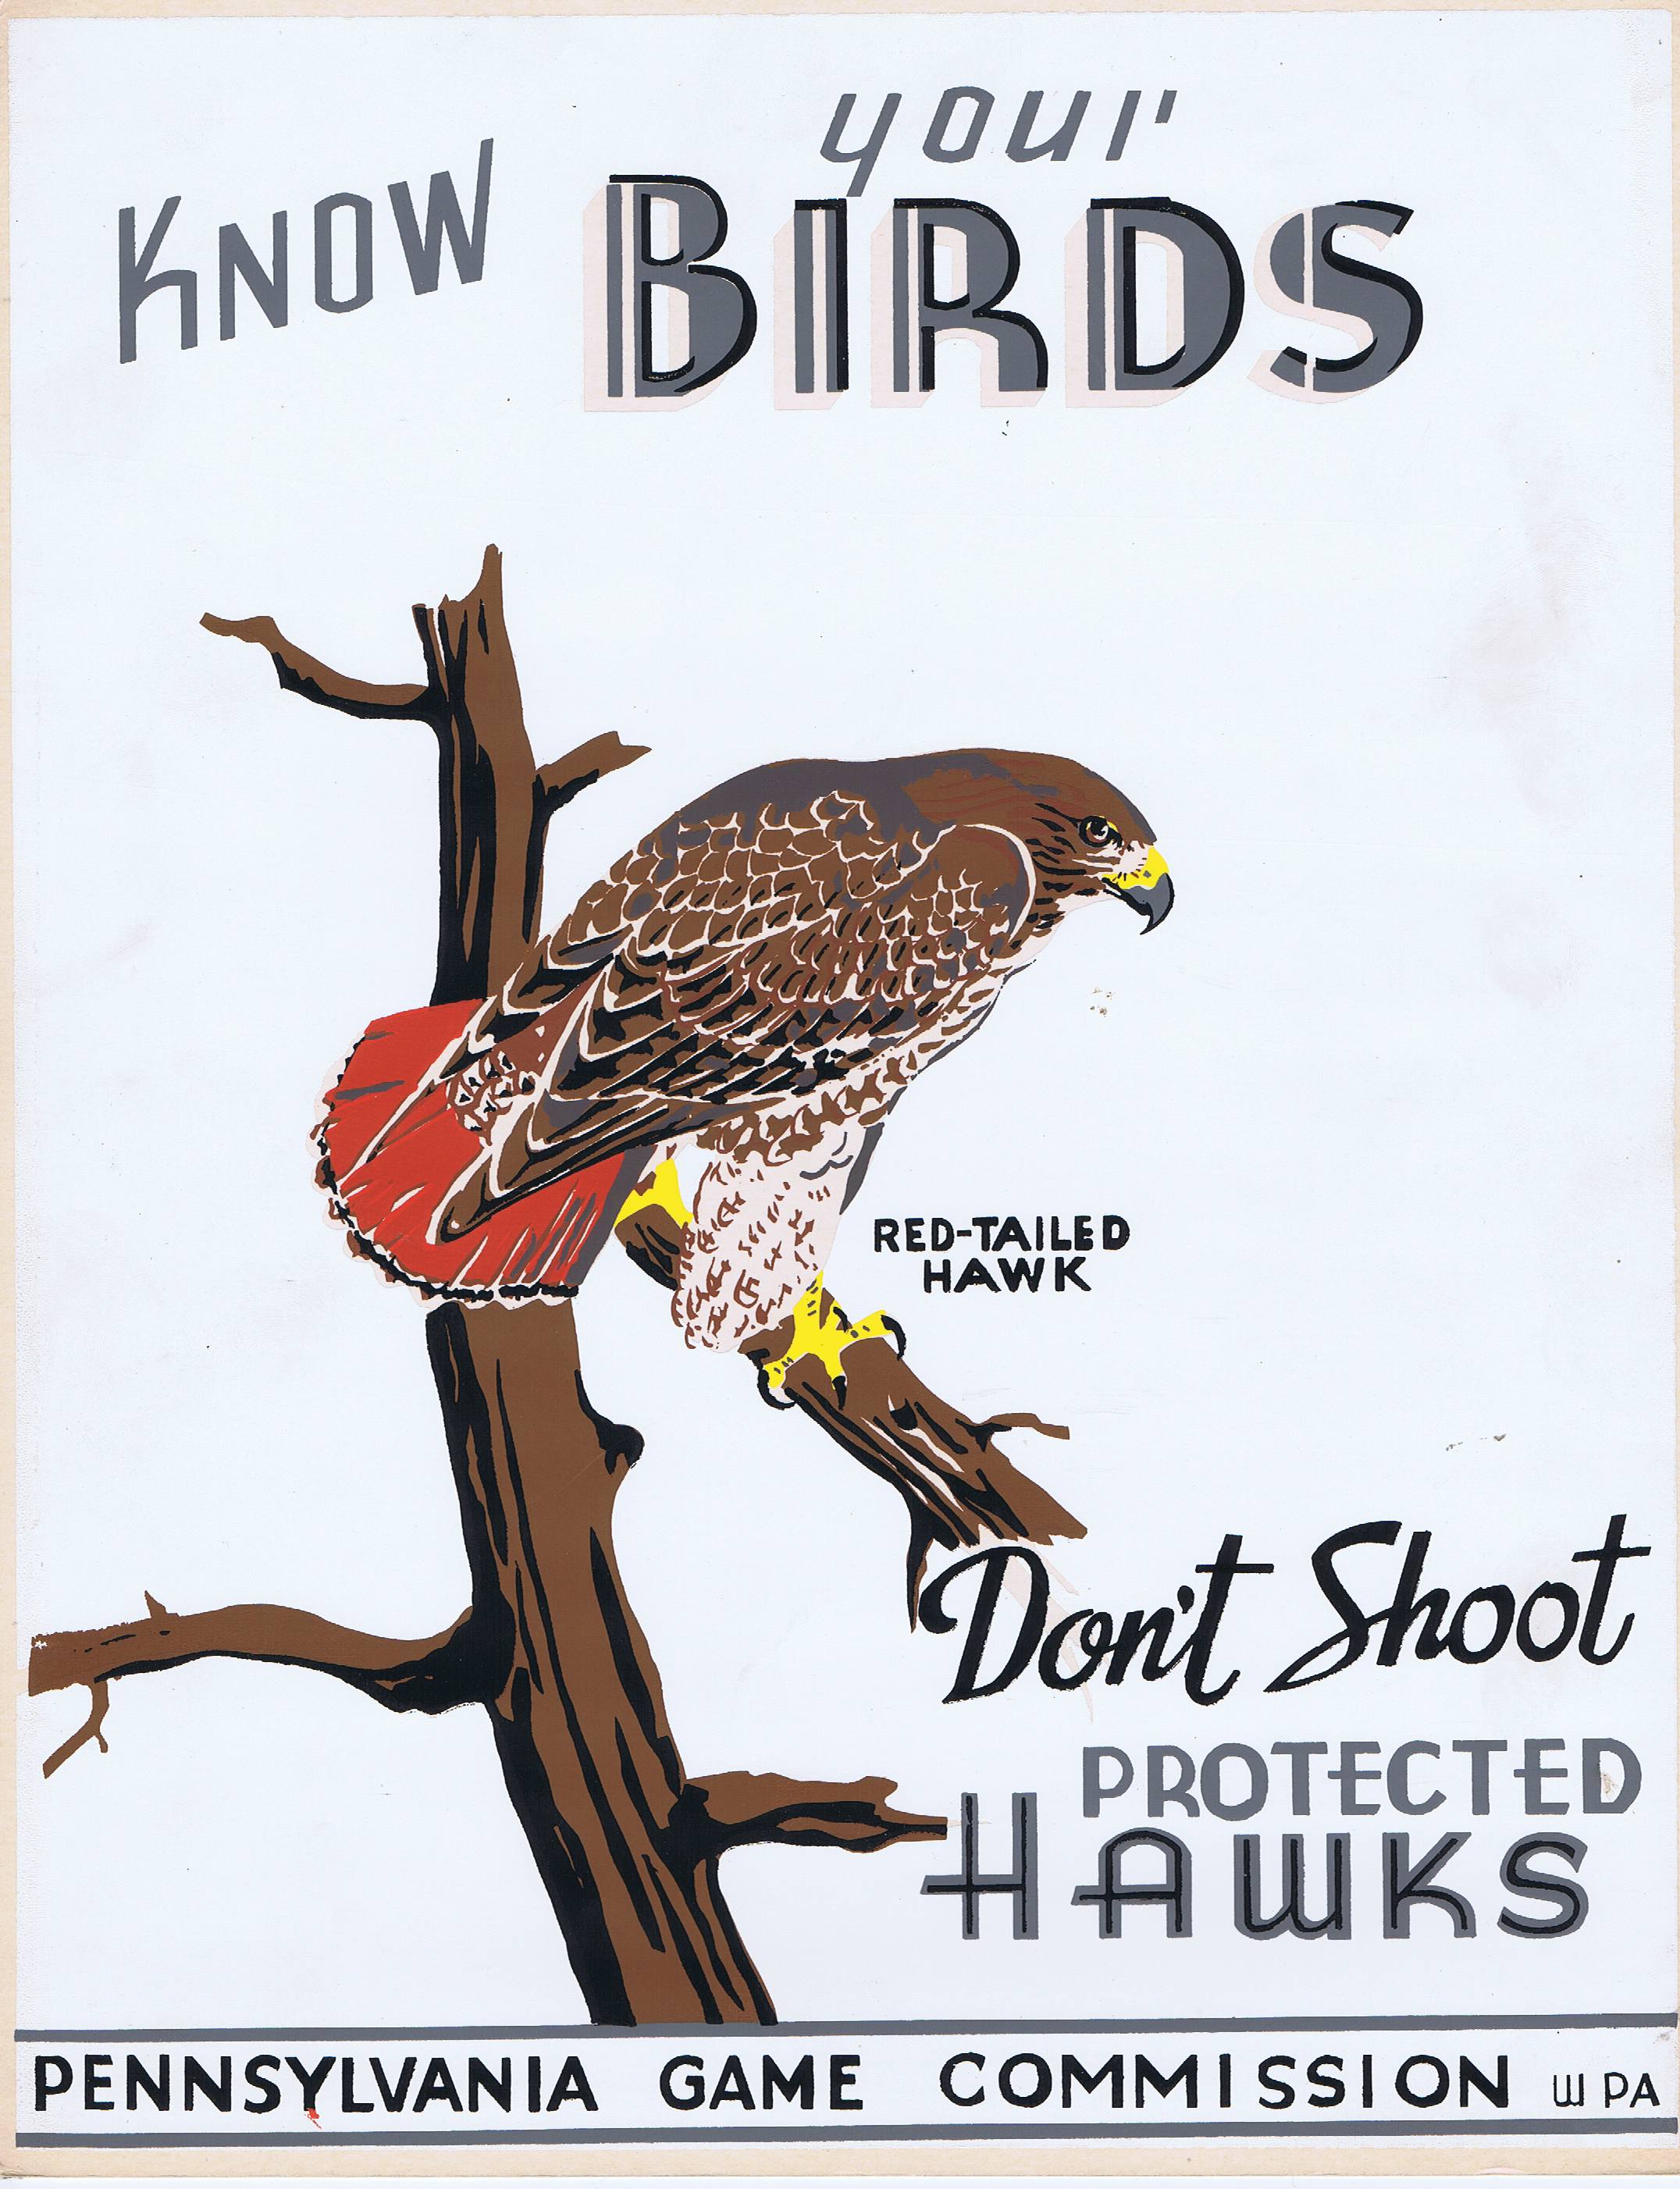 J915	KNOW YOUR BIRDS - DON’T SHOOT PROTECTED HAWKS - PENNSYLVANIA GAME COMMISSION WPA